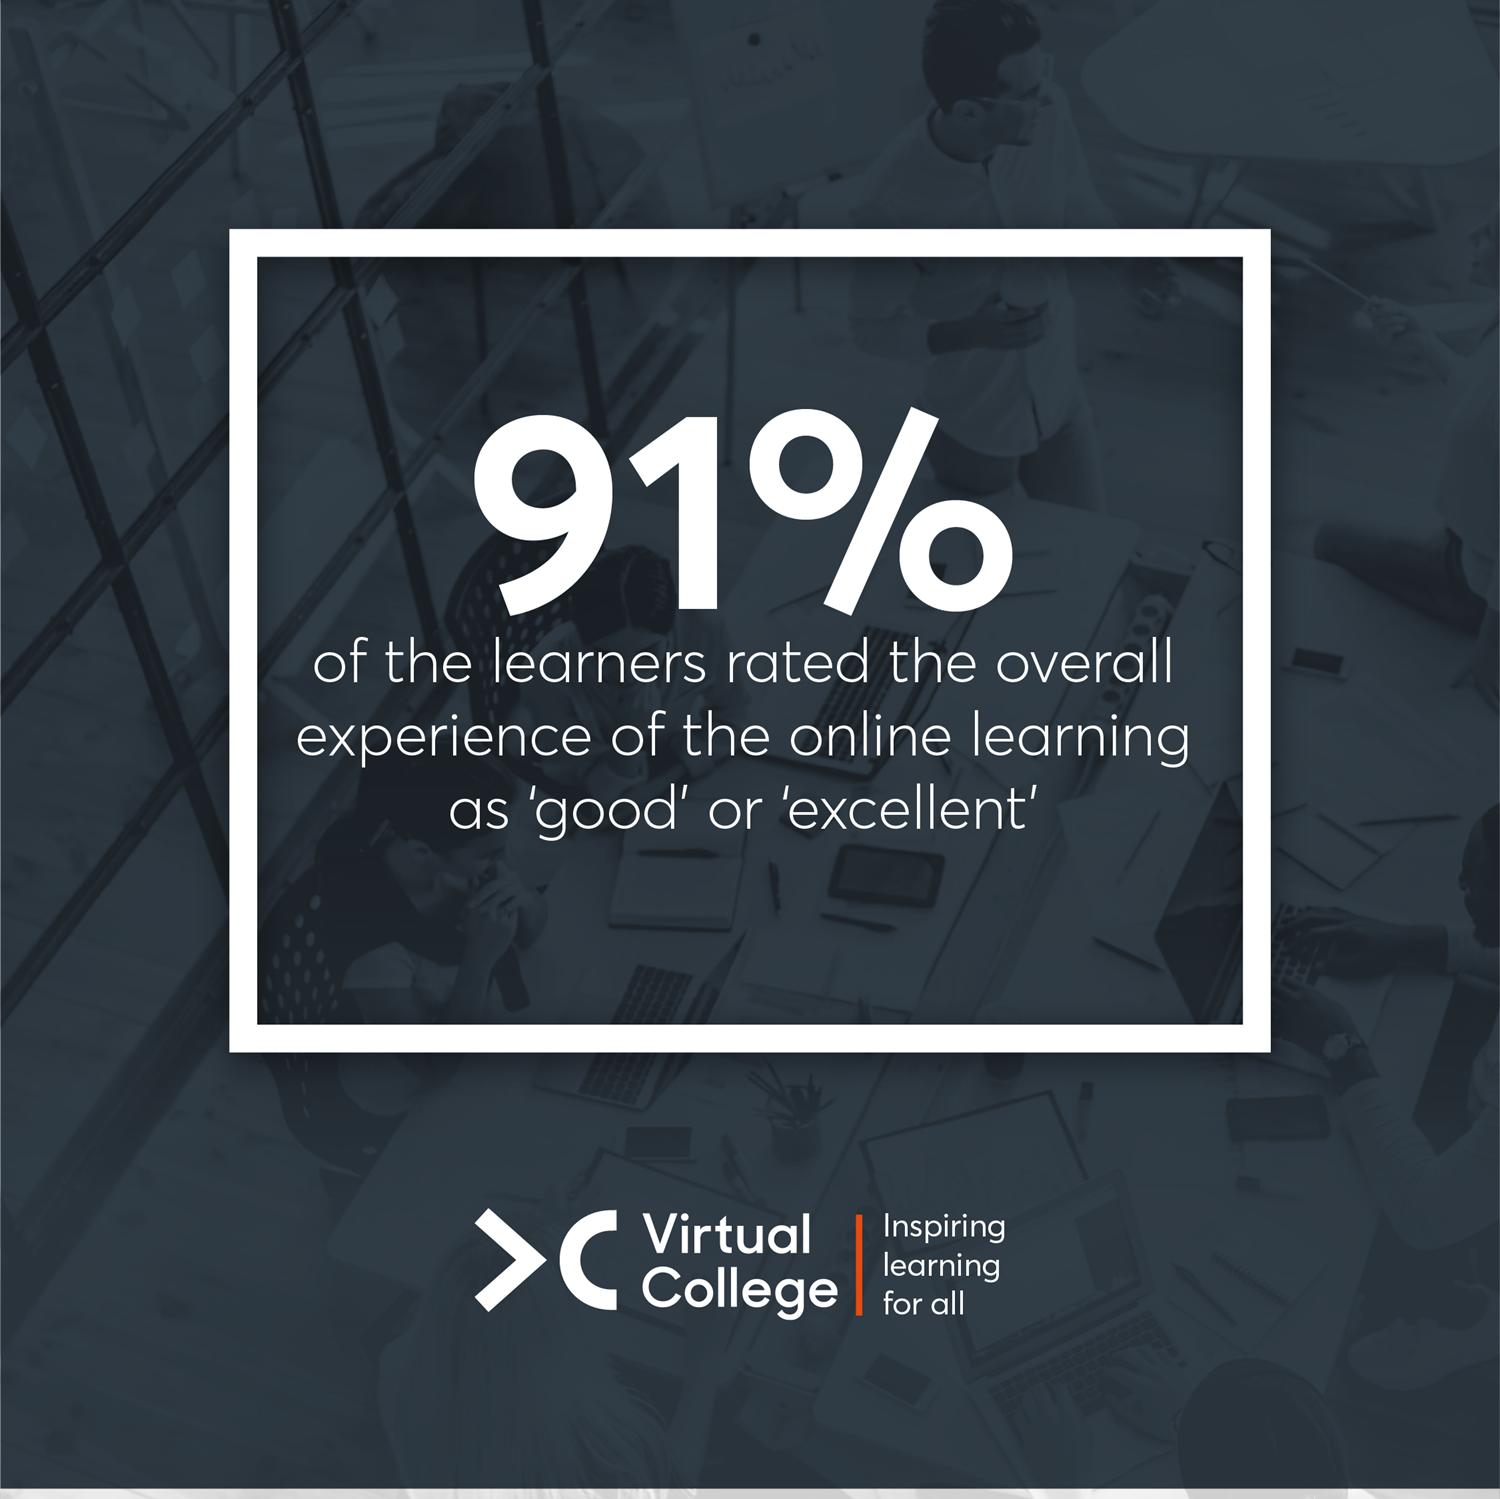 91% of the learners rated the overall experience of the online learning as ‘good’ or ‘excellent’